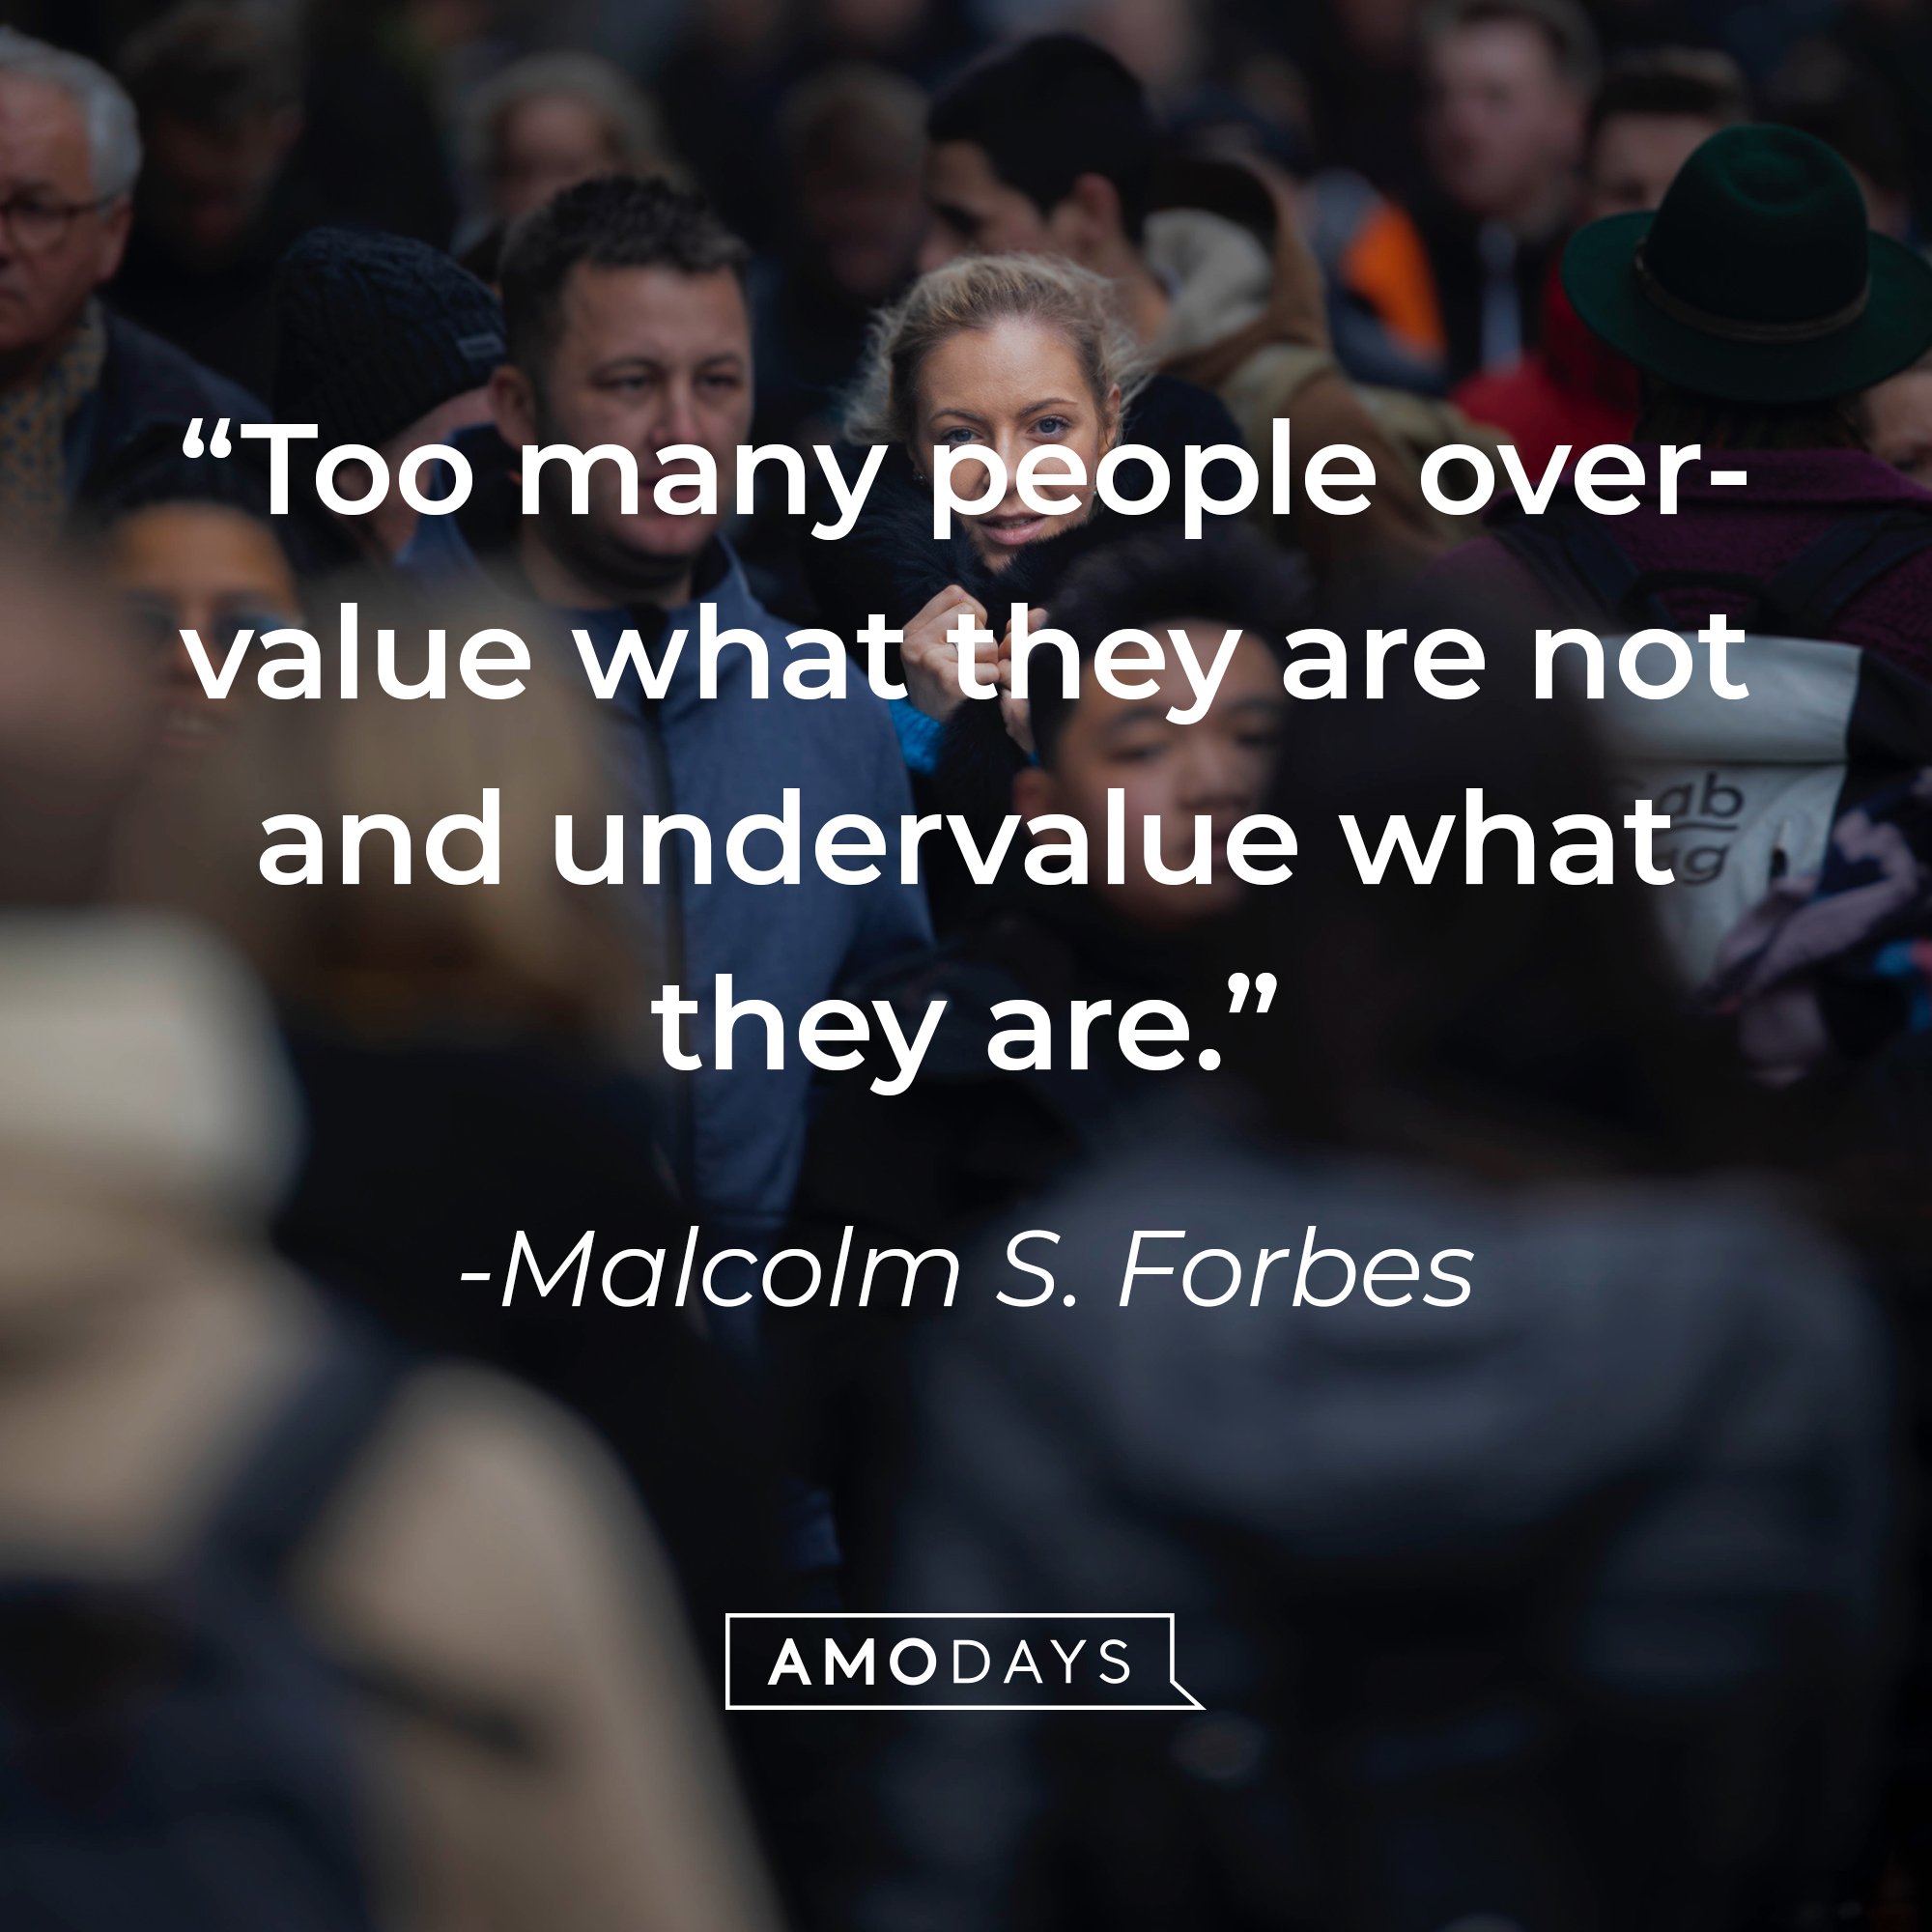 “ Malcolm S. Forbes's quote: Too many people overvalue what they are not and undervalue what they are.” | Image: AmoDays